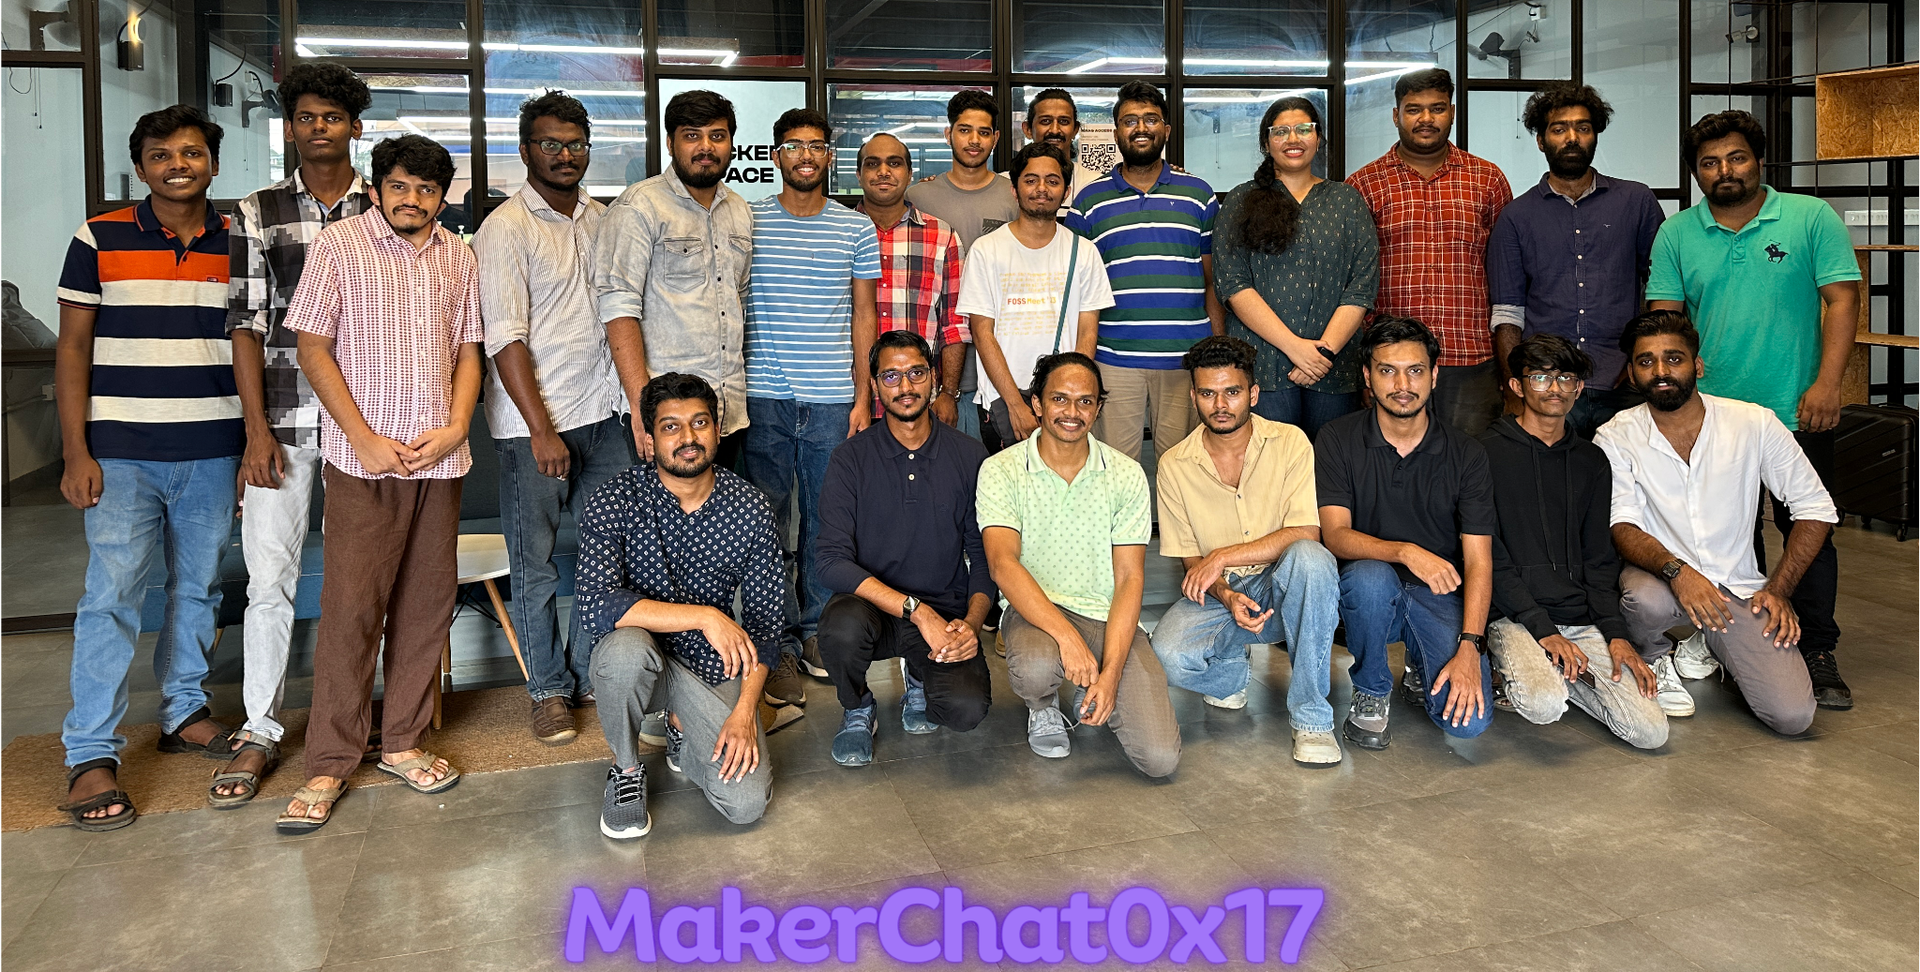 Diving Deep into Mechanical Keyboards: A Recap of MakerChat0x17 - Cover Image